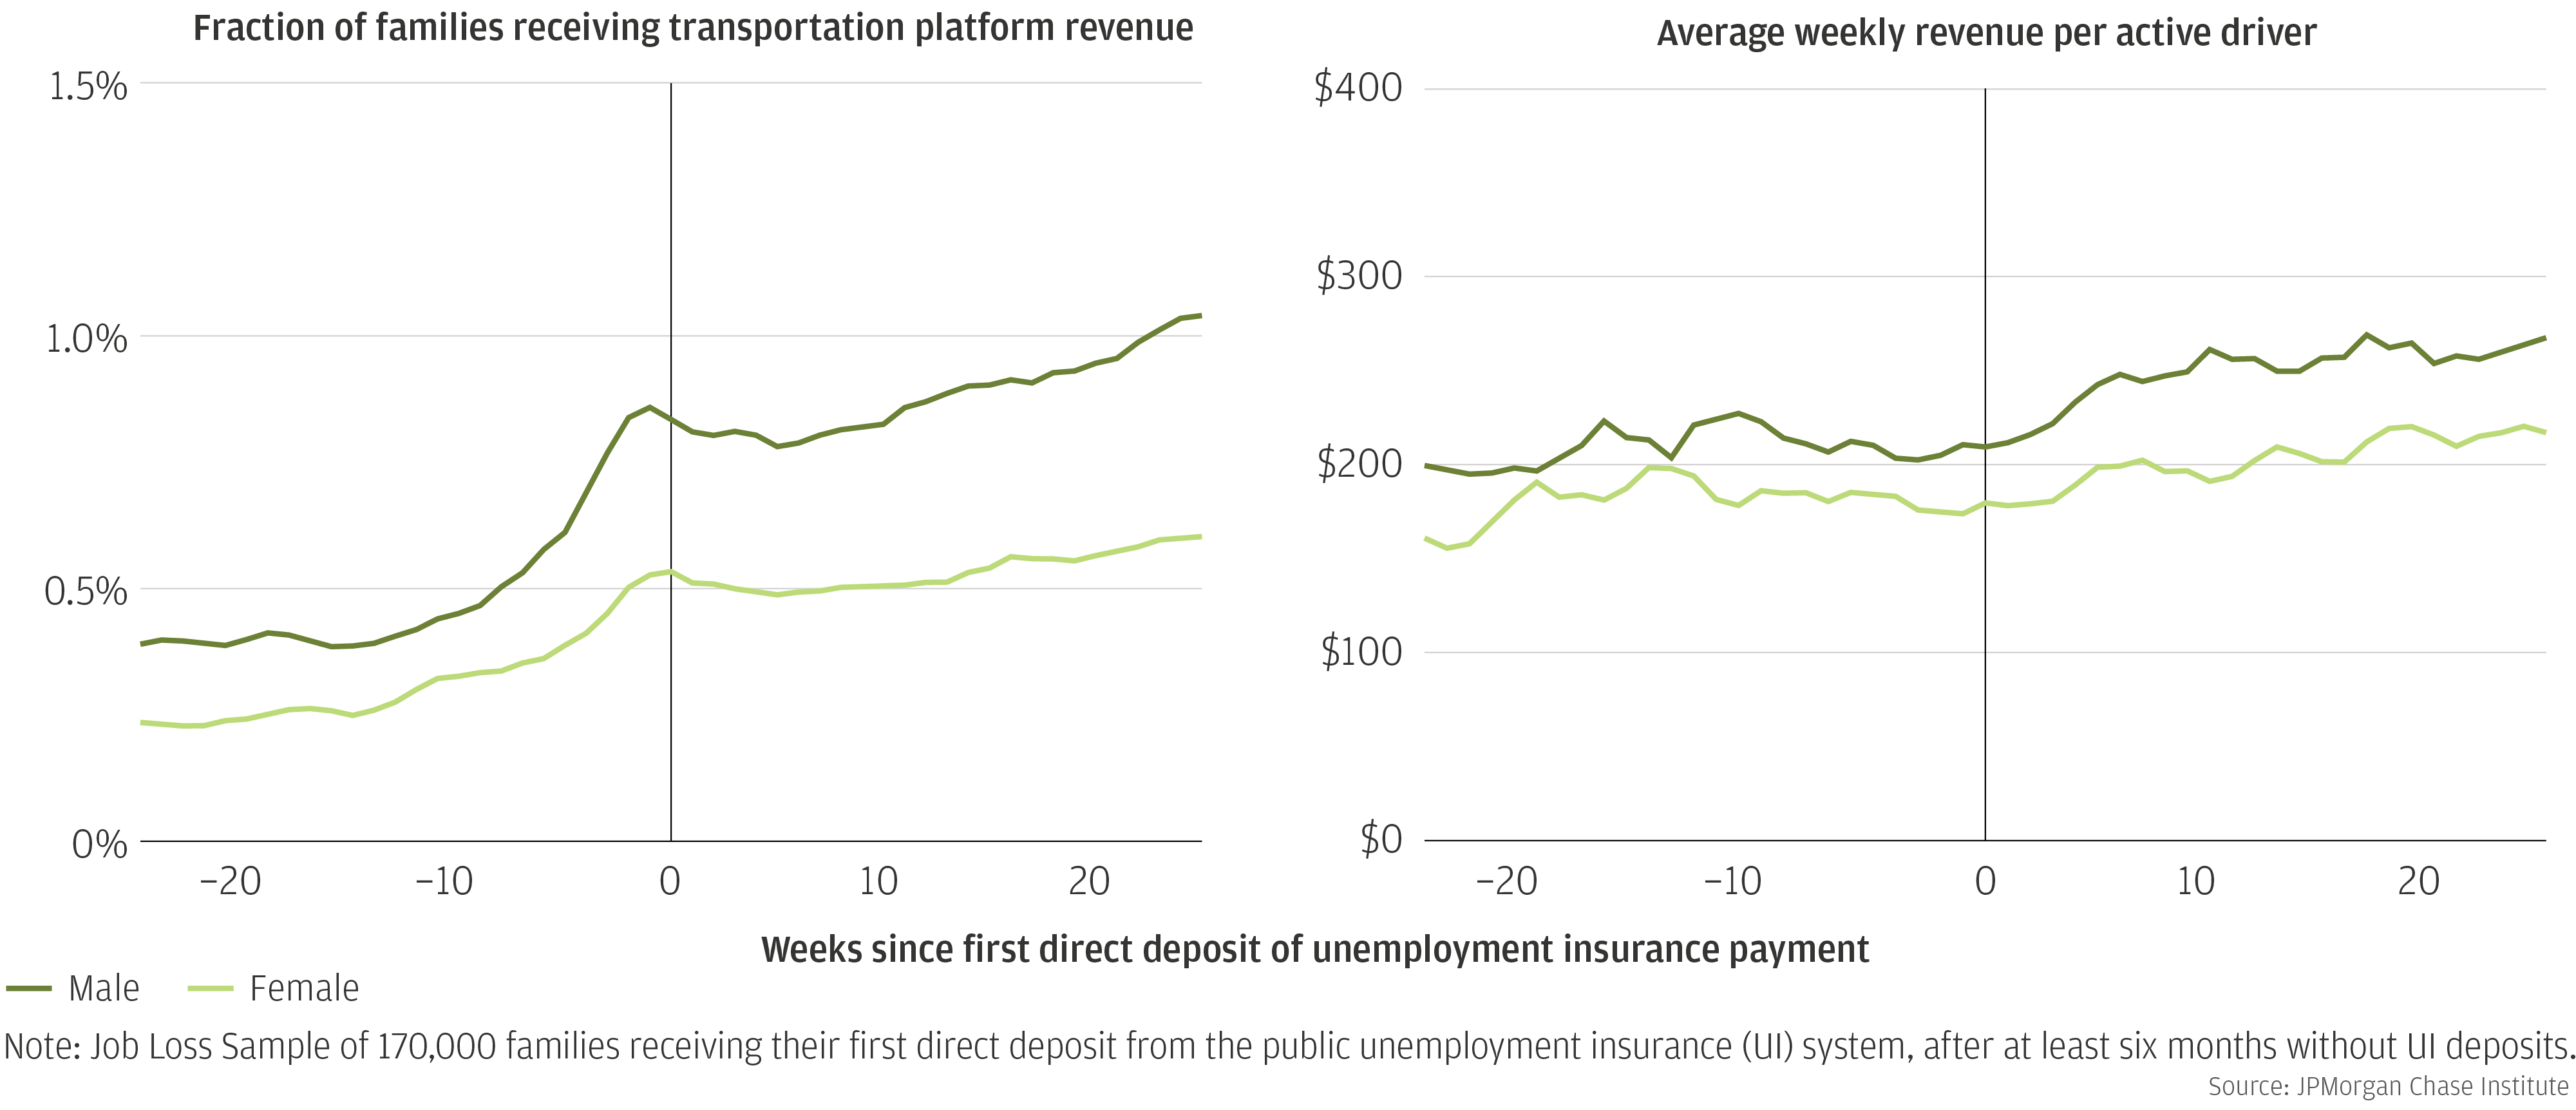 Line graph describes how transportation platform participation and average weekly revenues increase more sharply around job loss for male account holders than female account holders